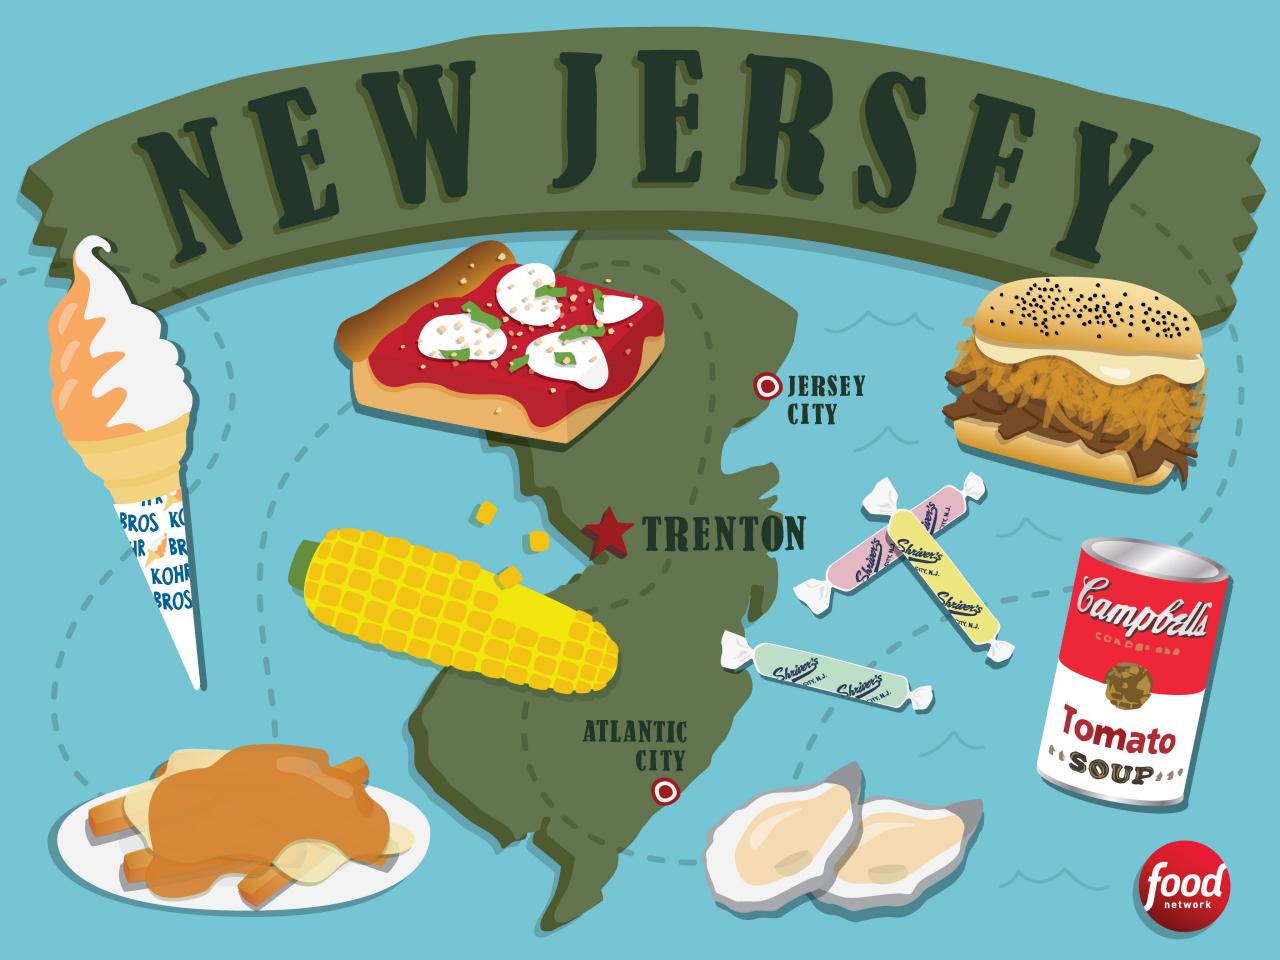 Best Food in New Jersey : Food Network